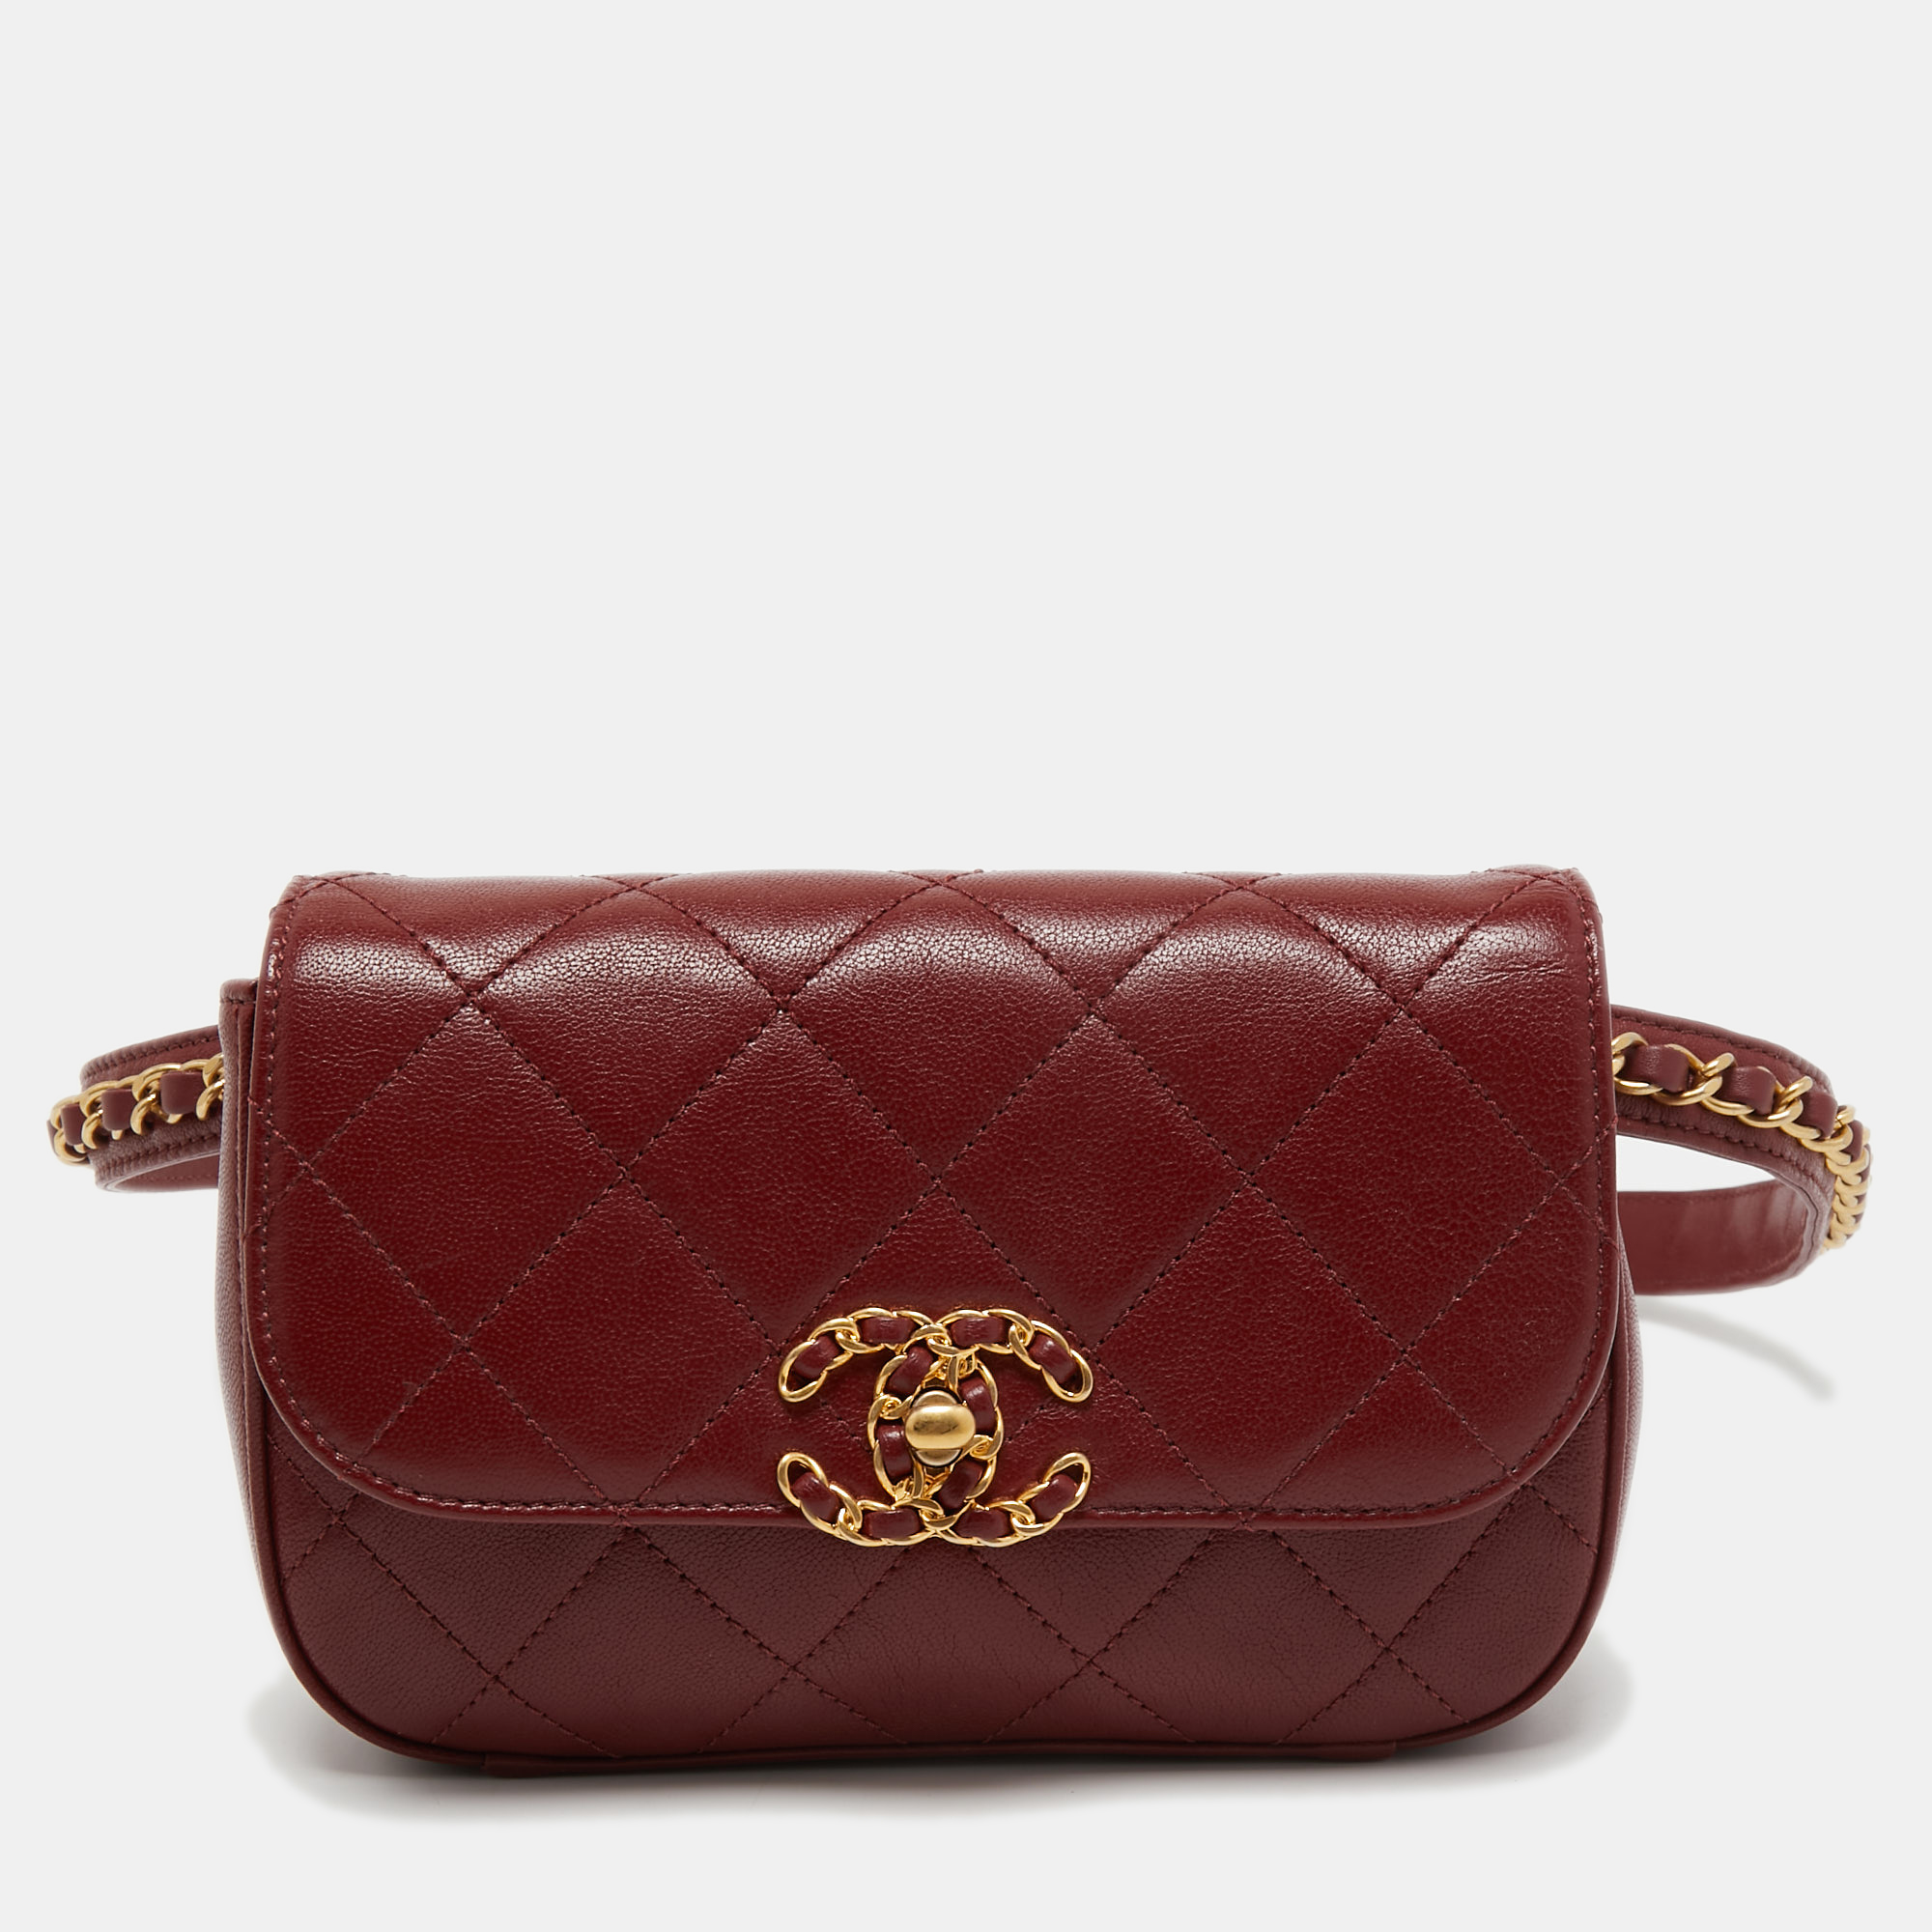 Pre-owned Chanel Burgundy Quilted Caviar Leather Cc Flap Belt Bag